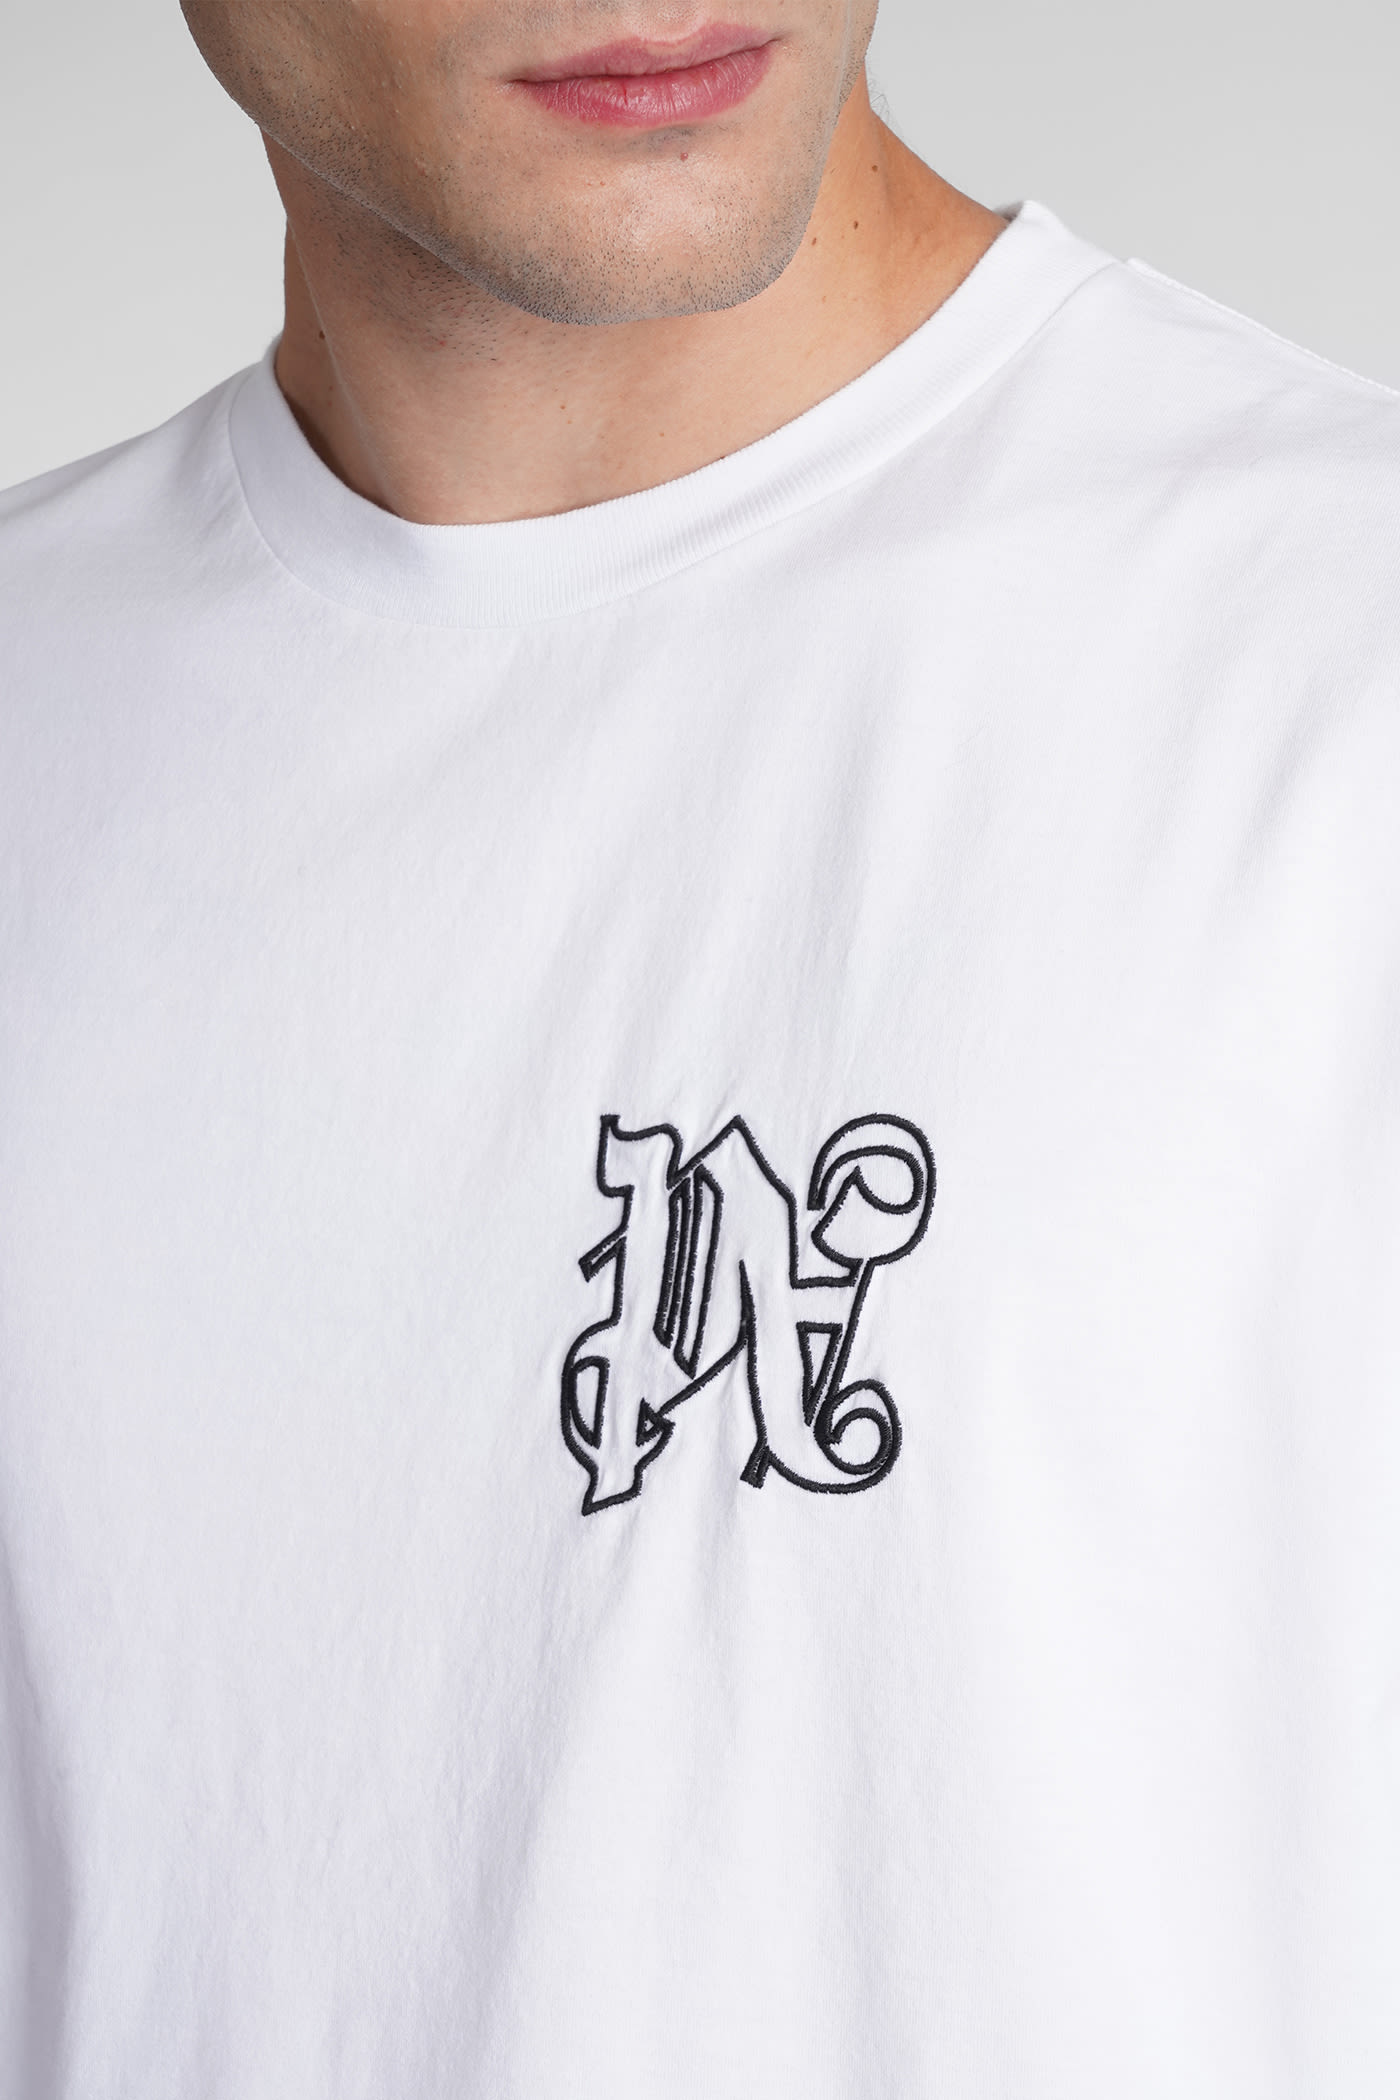 Shop Palm Angels T-shirt In White Cotton